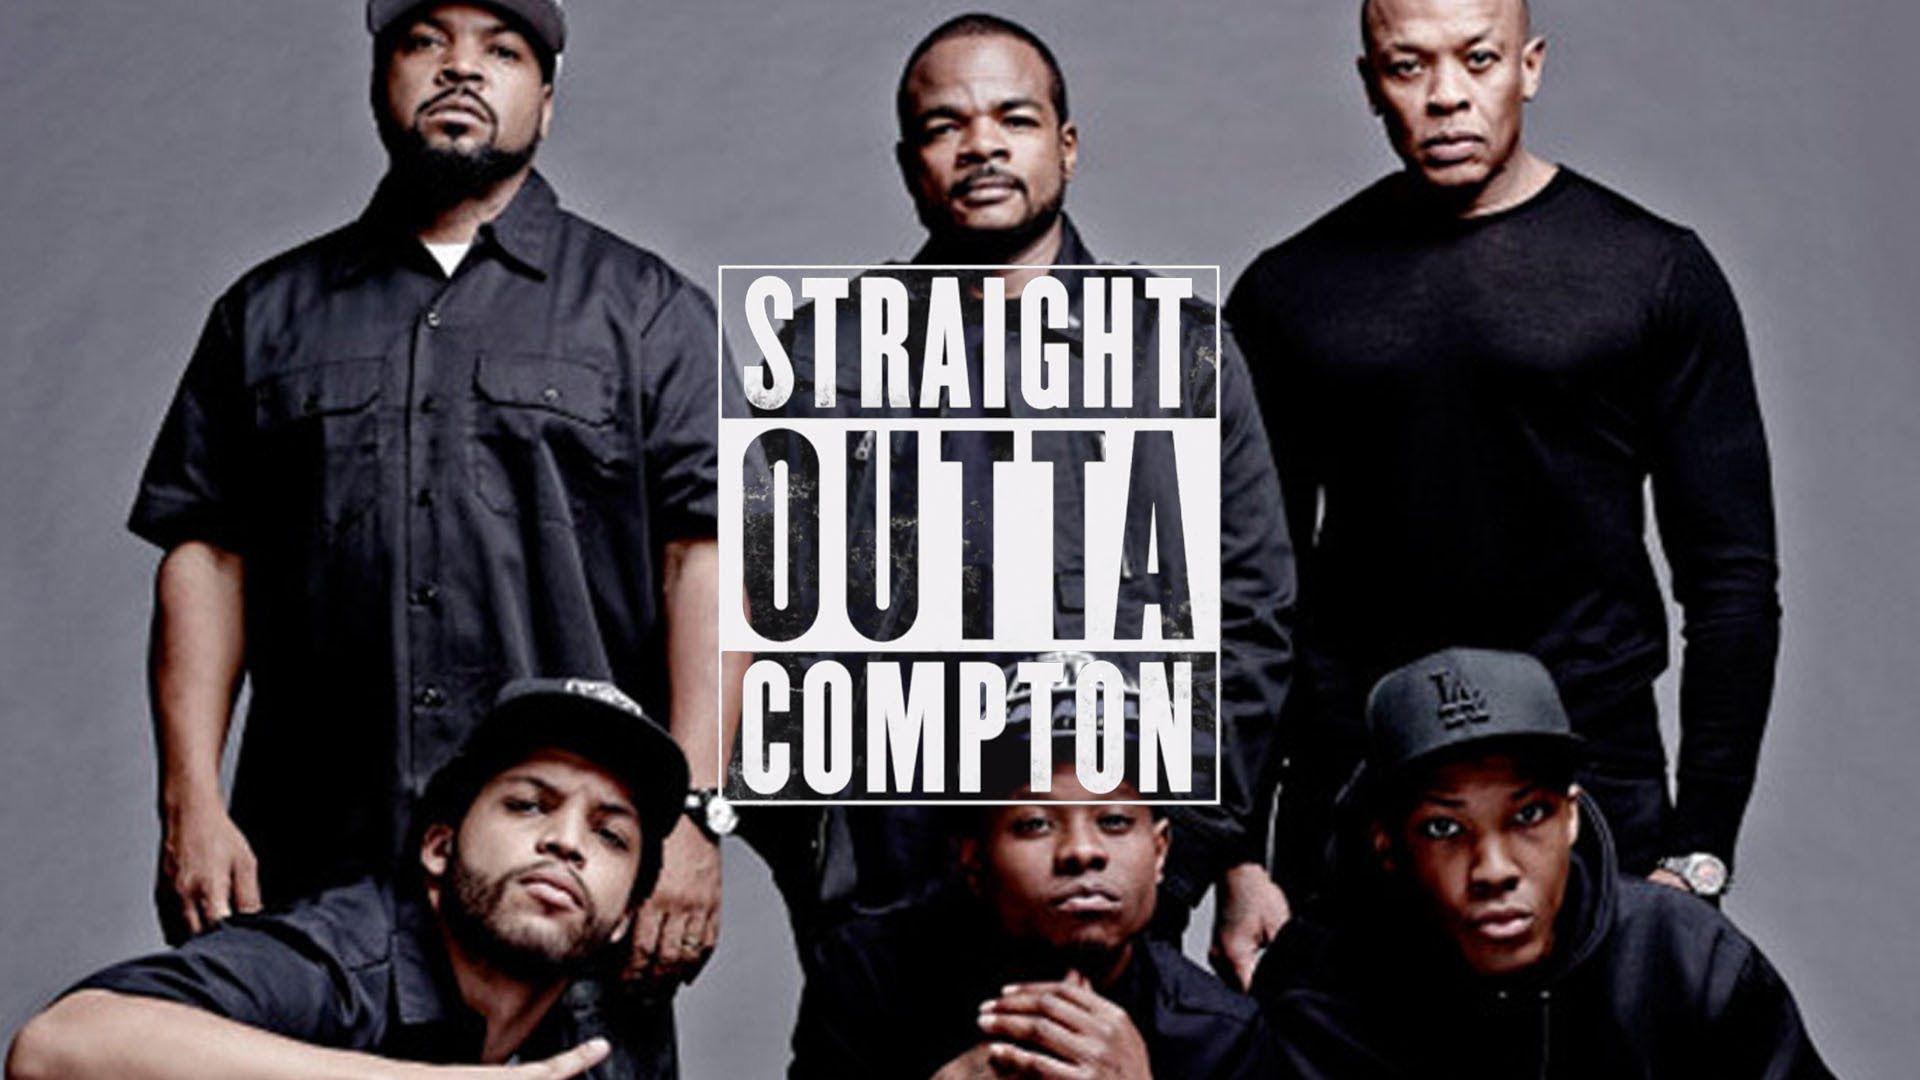 1920x1080px Straight Outta Compton 405.39 KB